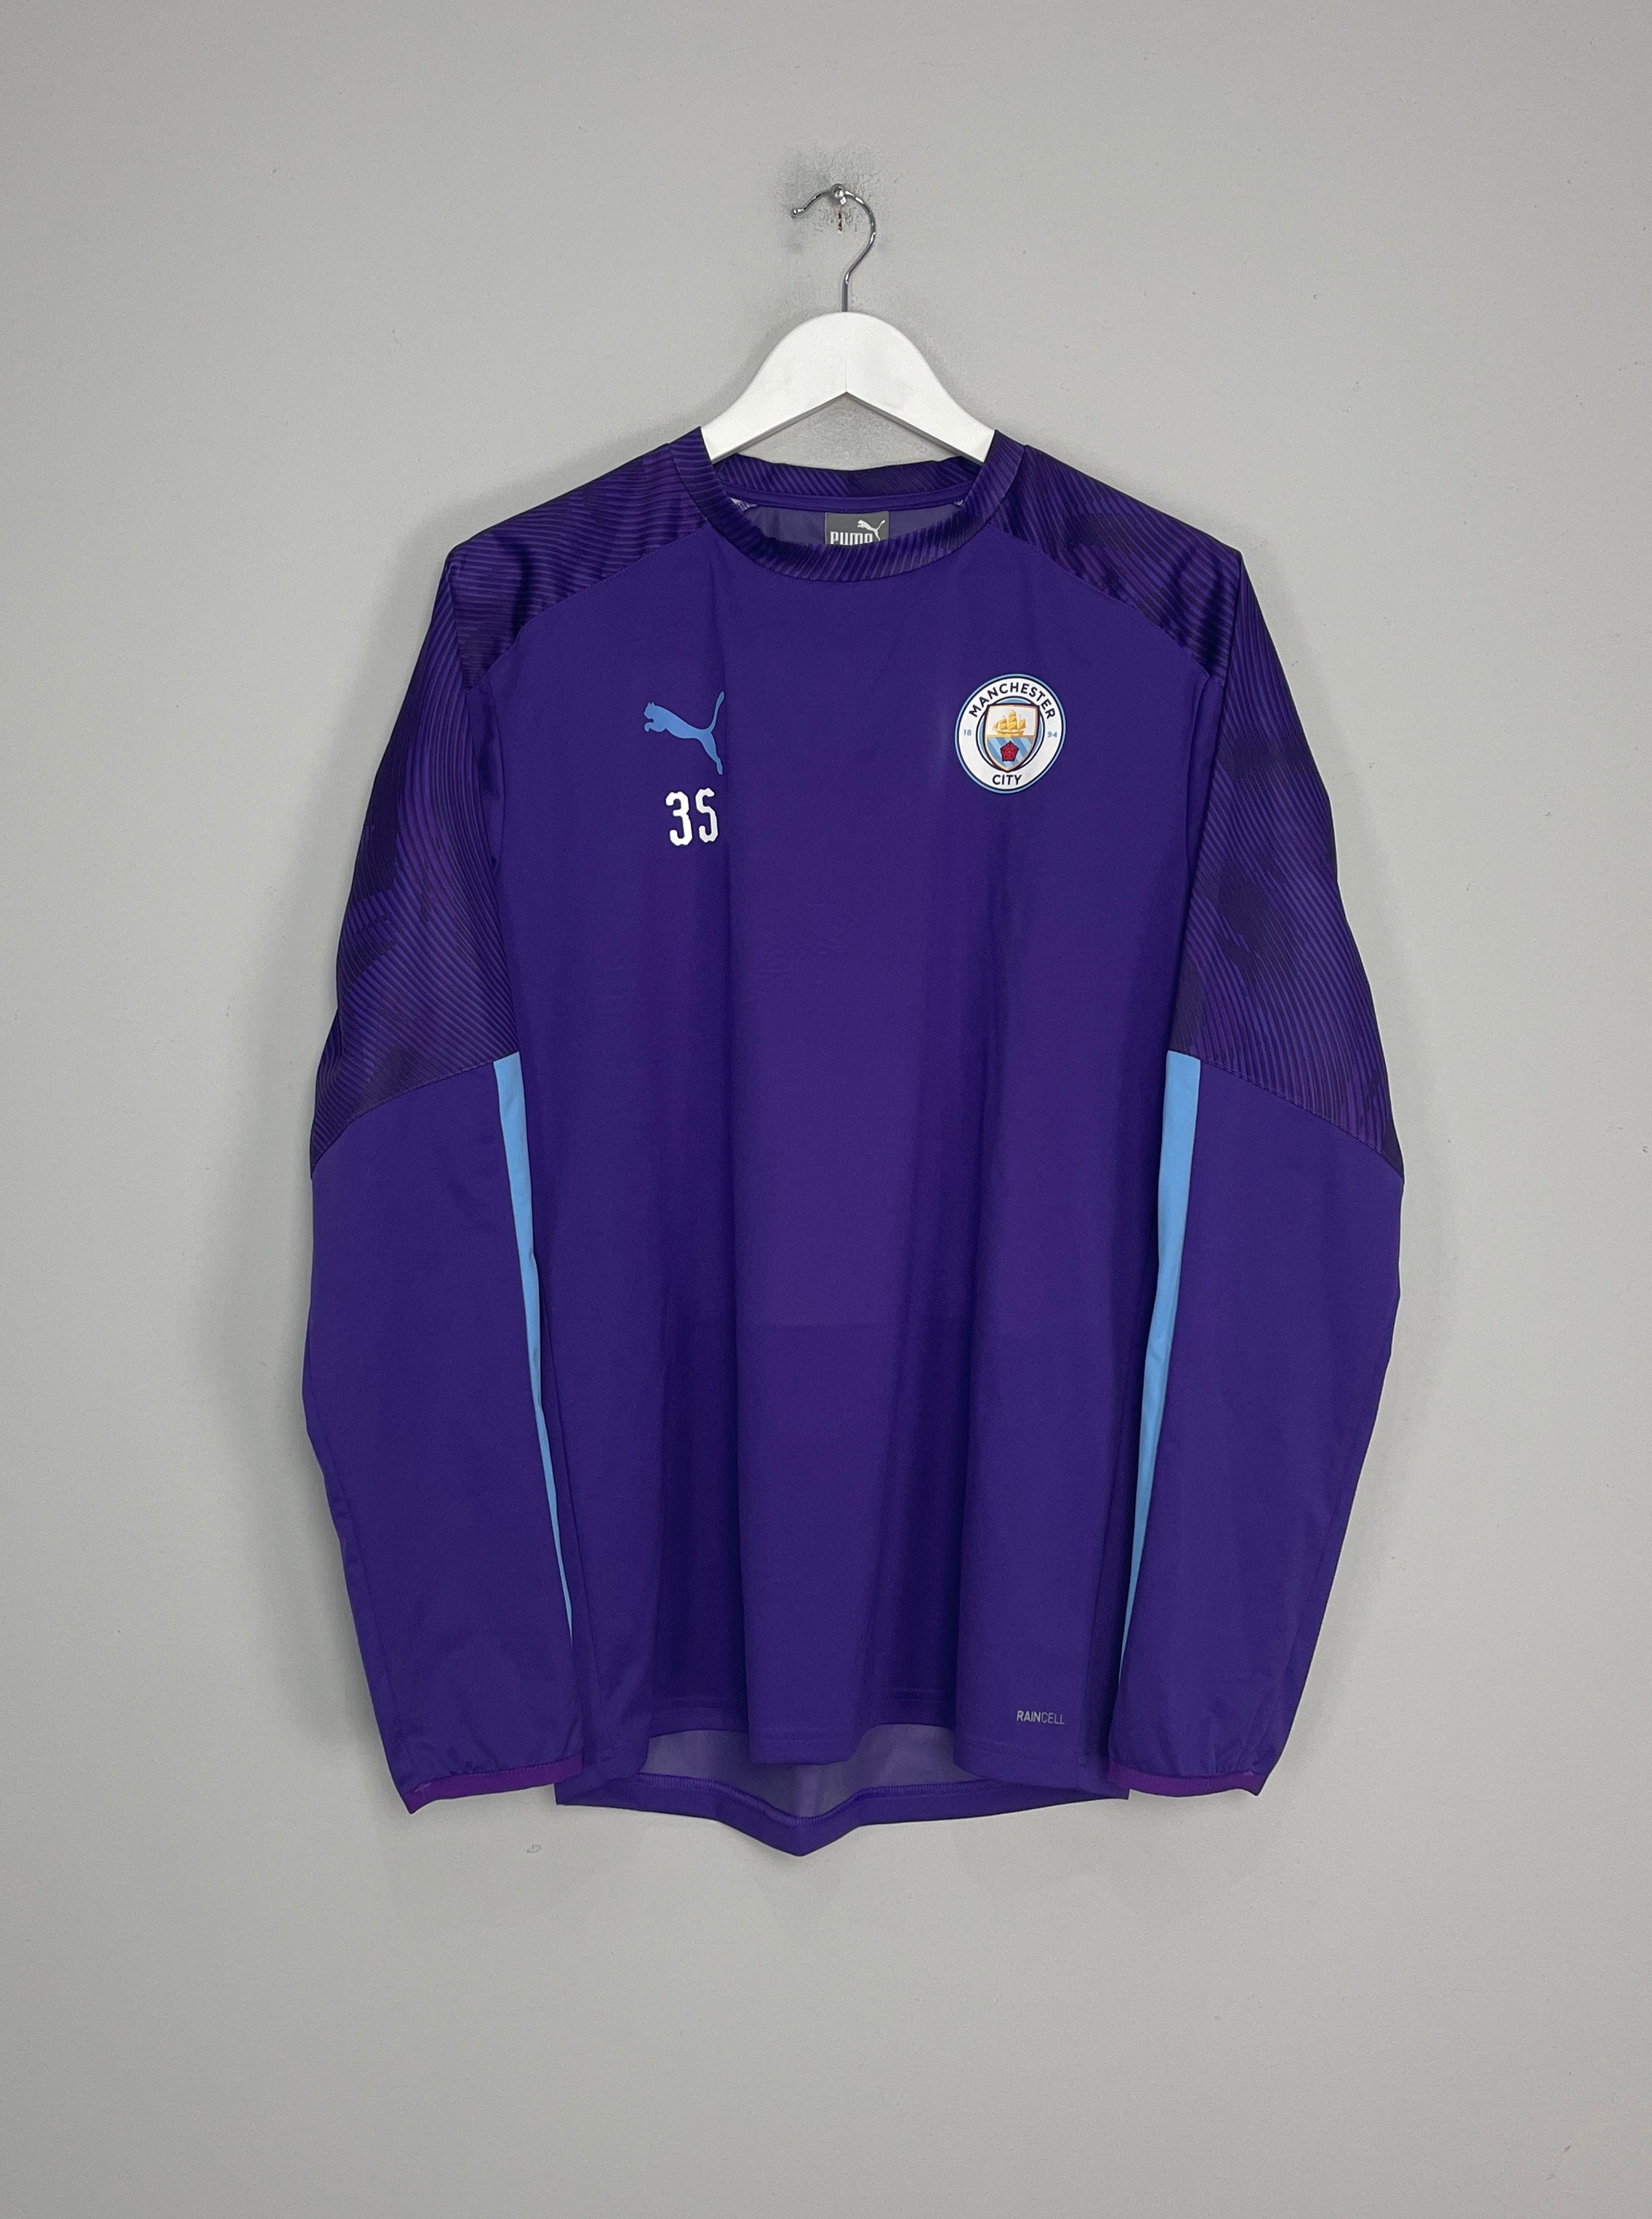 2019/20 MANCHESTER CITY #35 *PLAYER ISSUE* DRILL TOP (M) PUMA